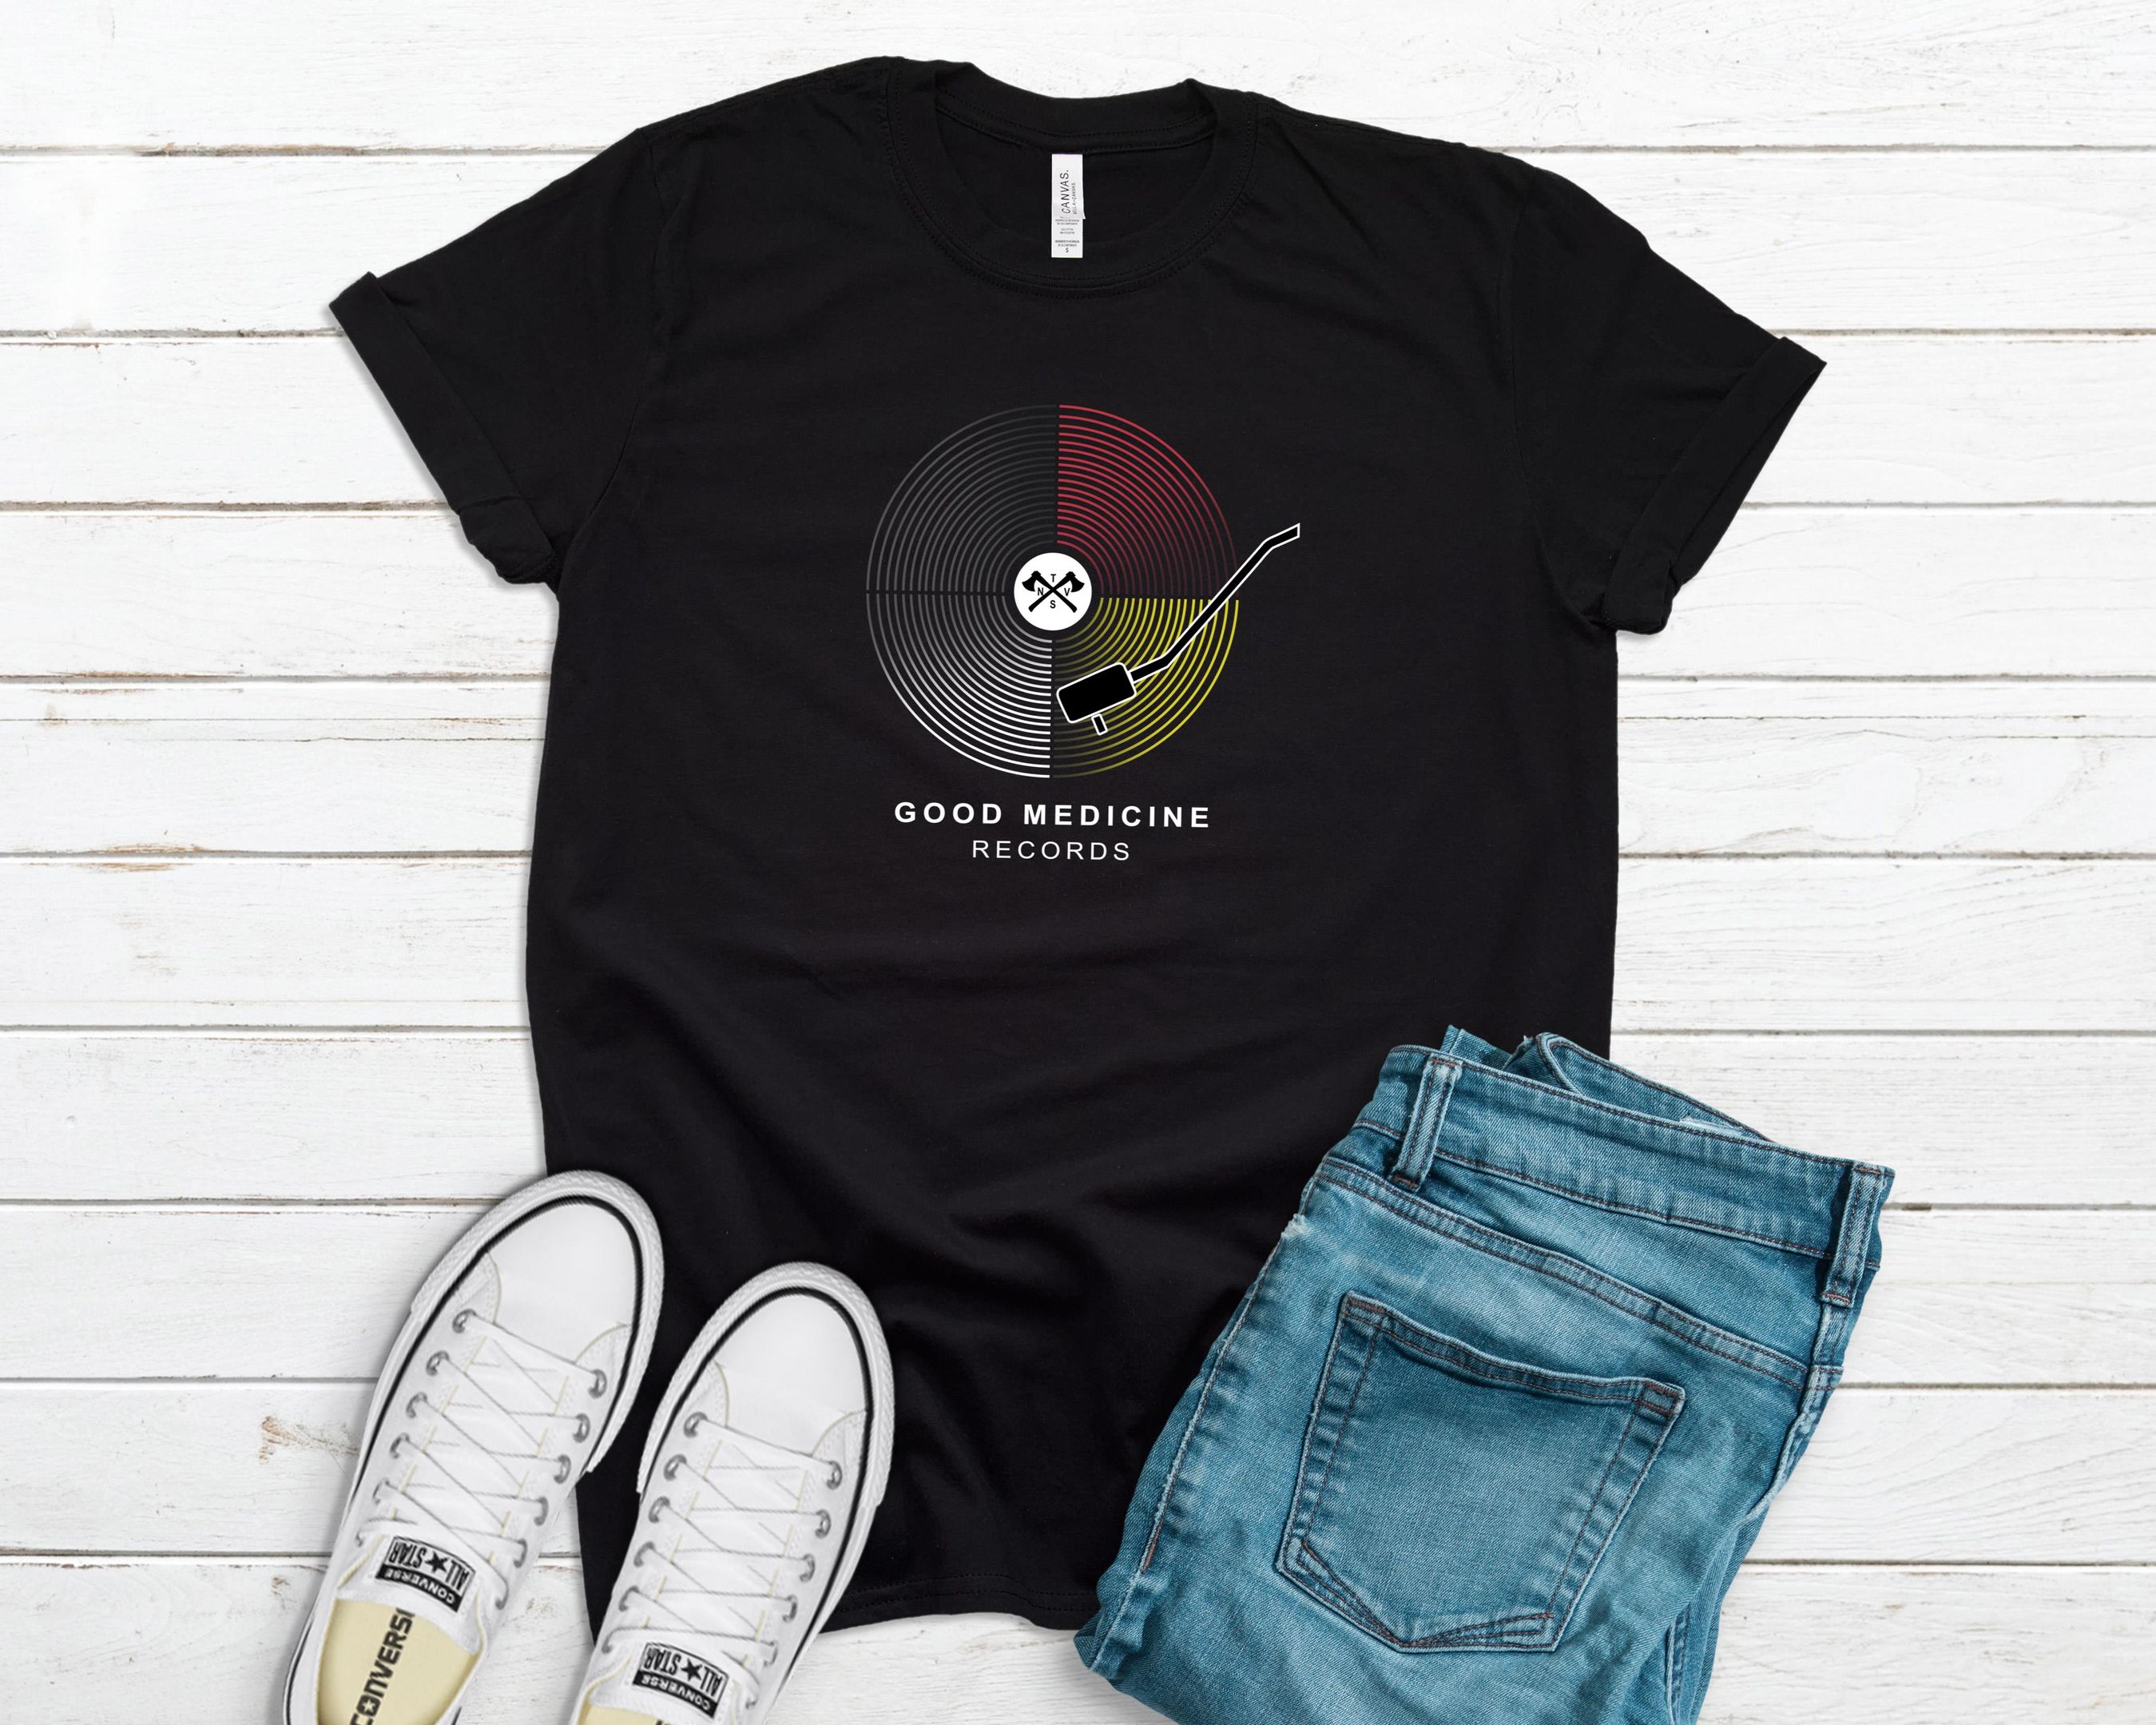 Good Medicine Records Shirt, Native T Shirt, Native American Shirt, Gift For Indigenous People